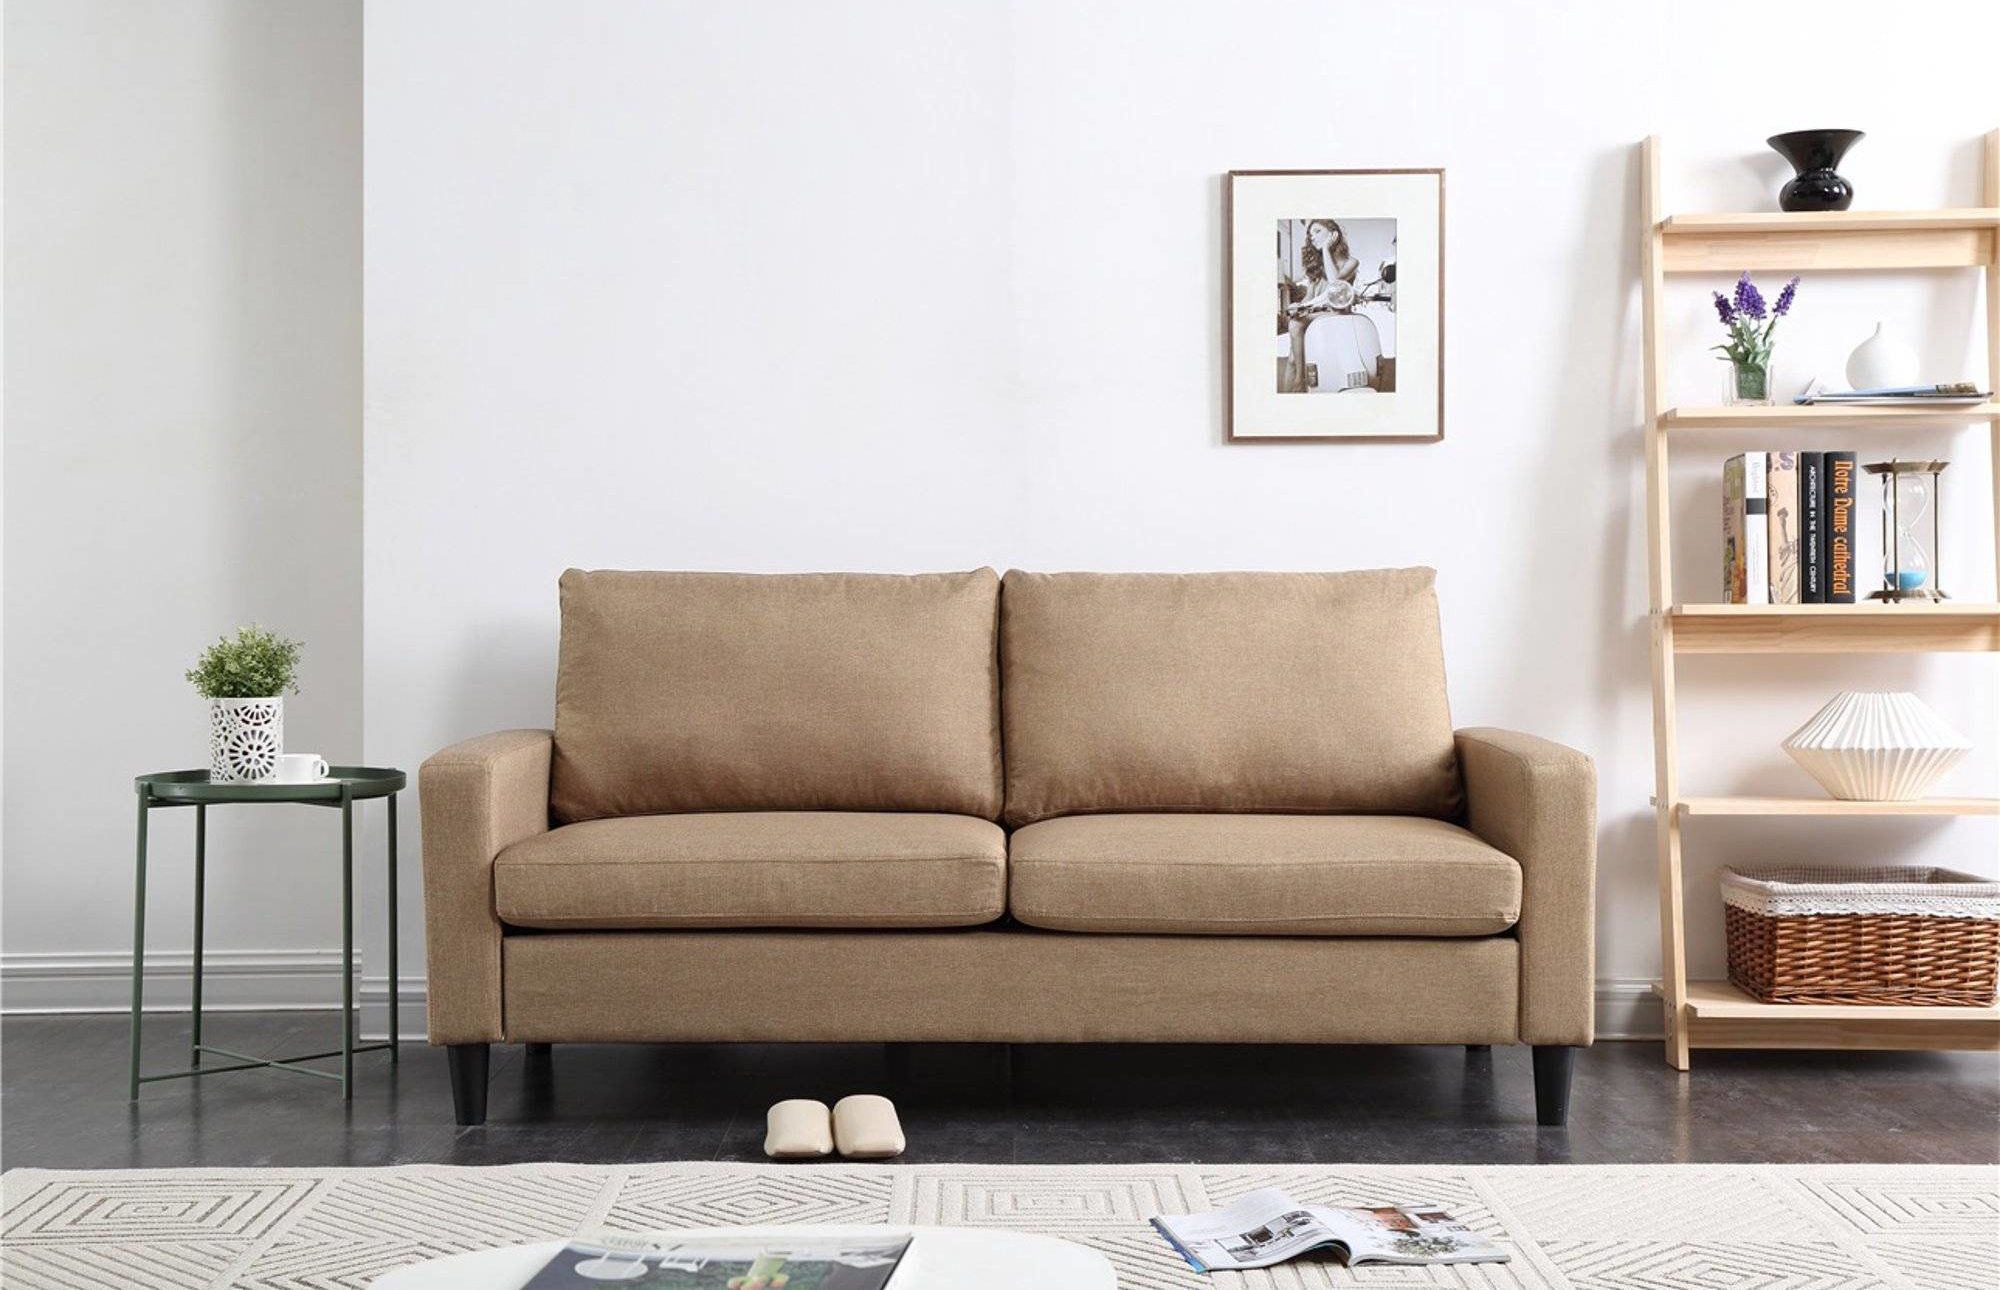 Track Arm Sofa with Linen Textured Fabric from Walmart